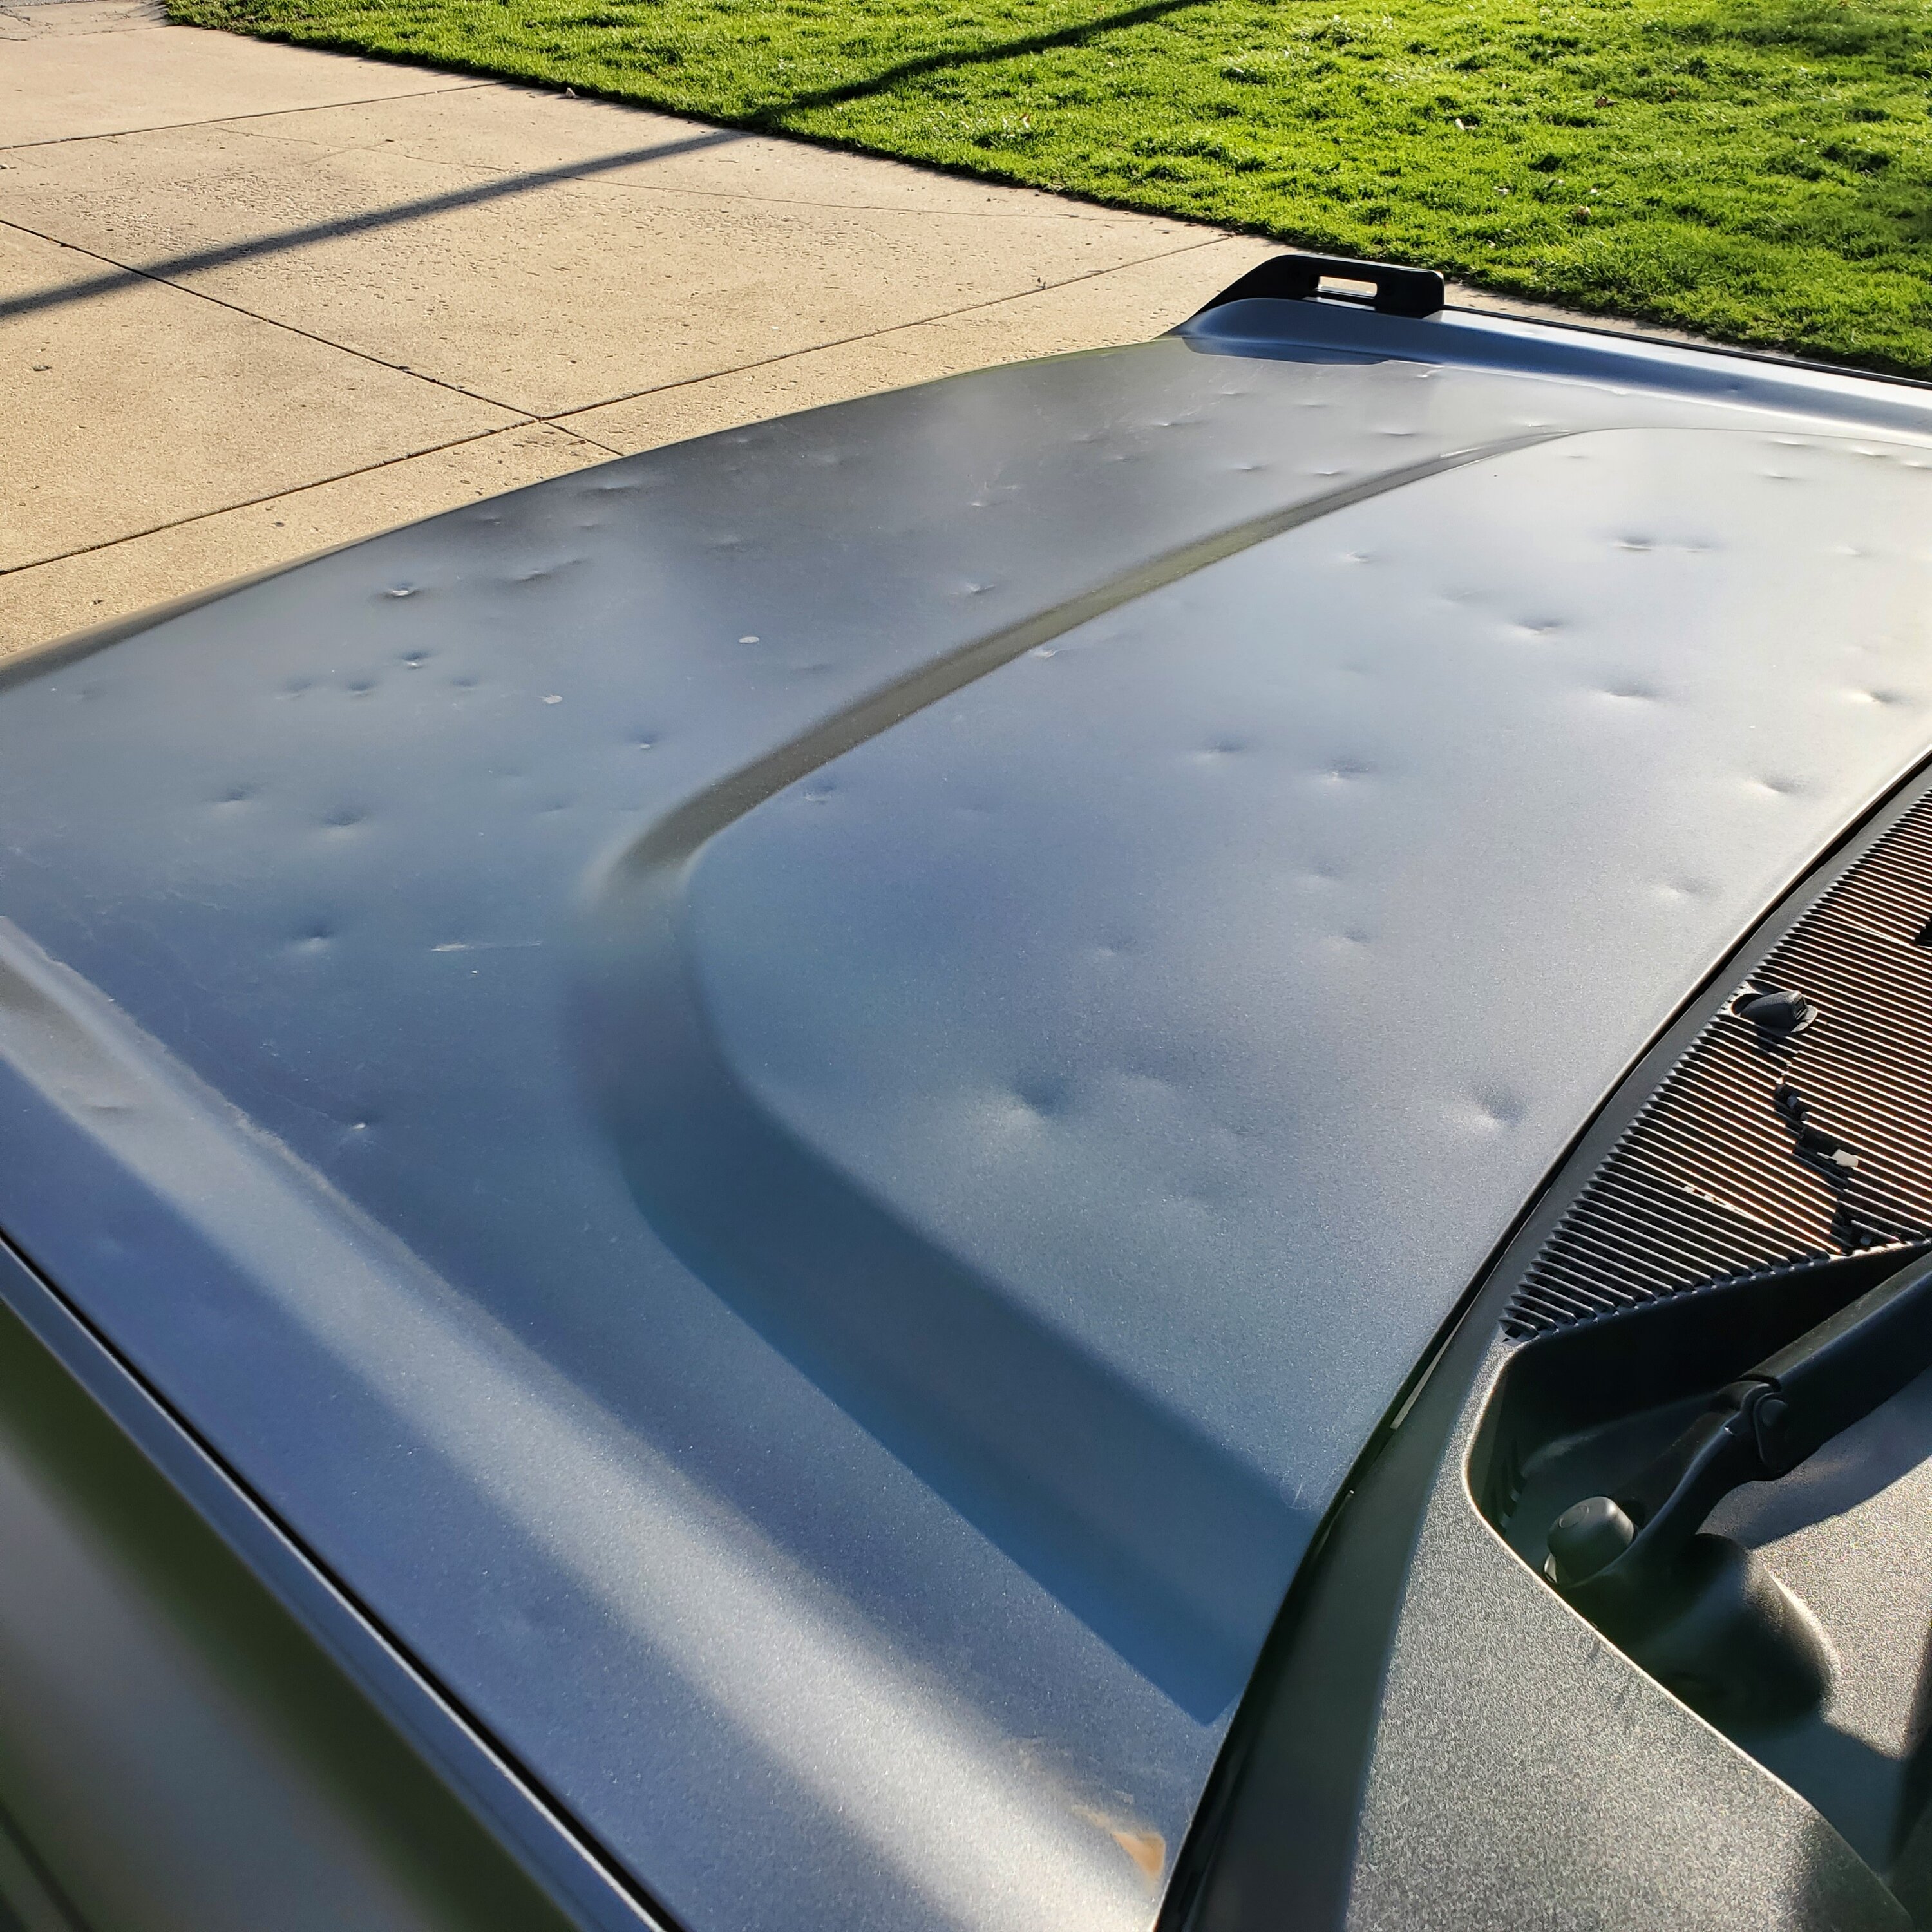 Ford Bronco ***Update 4/19 Hail no... damage to MIC 2.0 hard top in large hail storm 20220819_142500